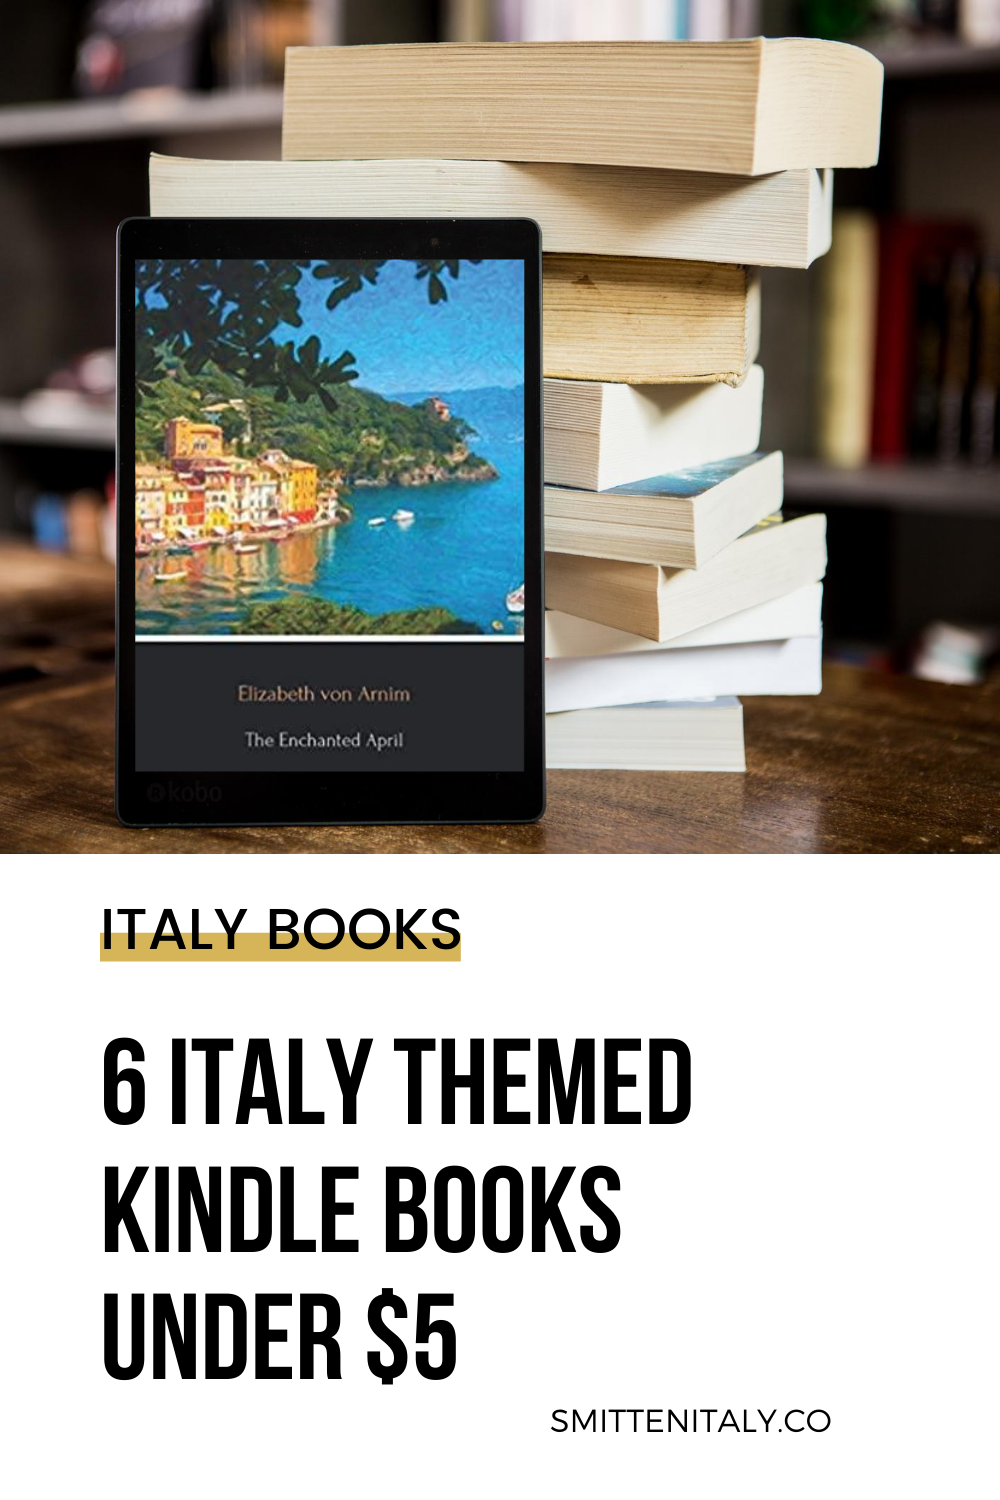 6 Italy themed Kindle books on a budget. 1